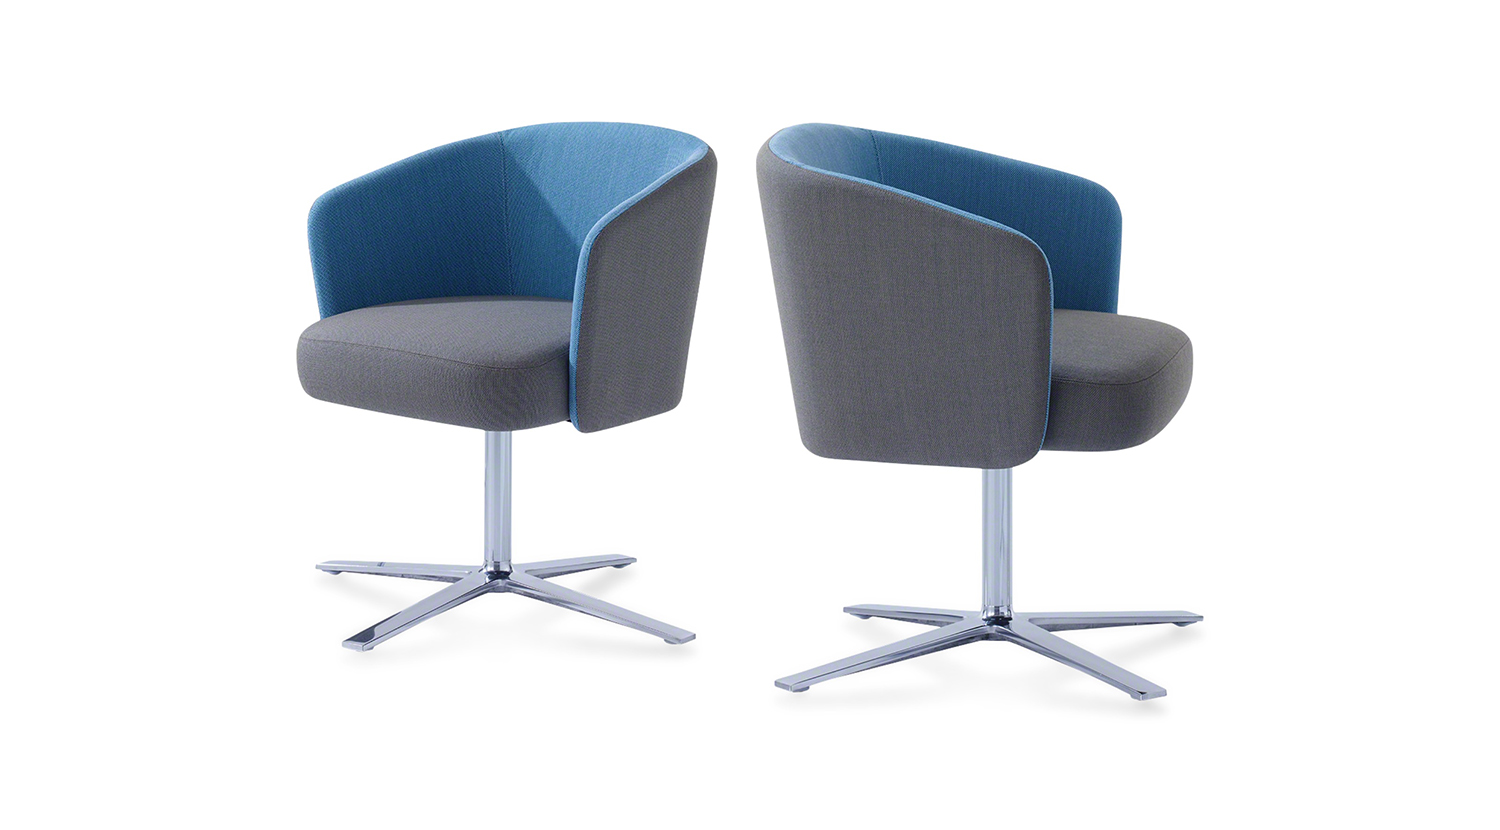 Two Hay modern chairs with grey cushion on the seat and blue cushion on the back